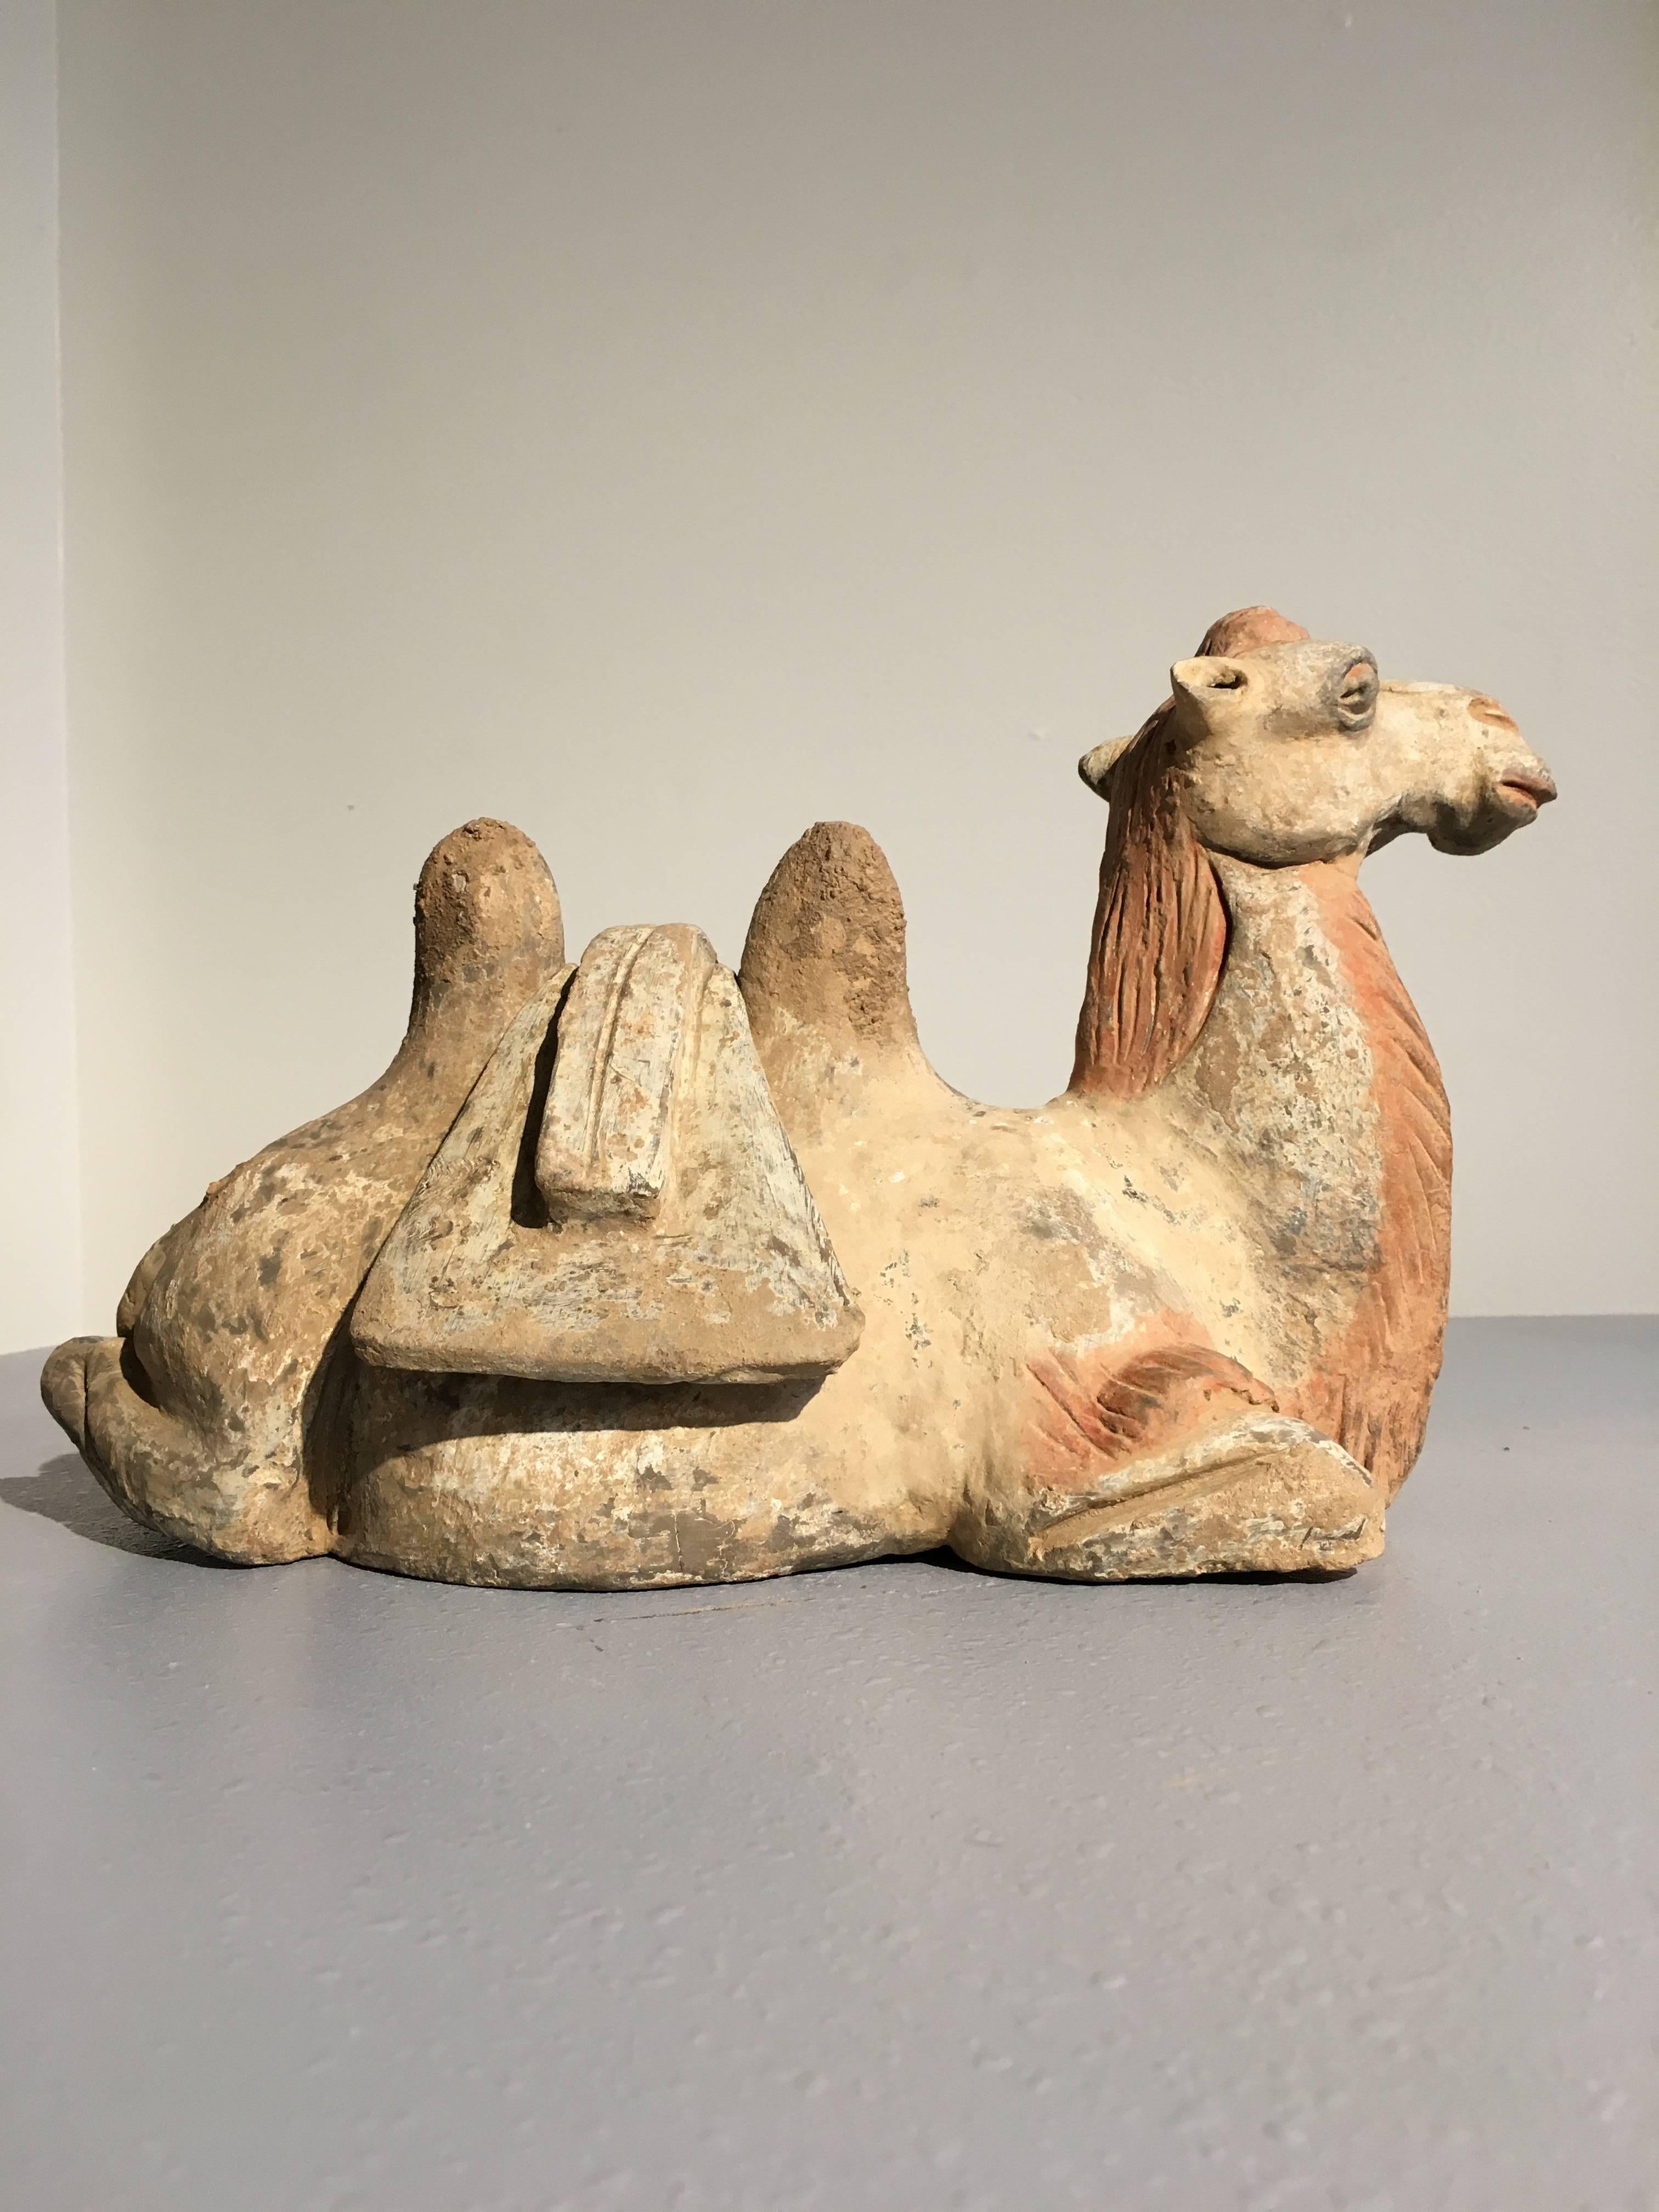 Fired Tang Dynasty Pottery Model of a Recumbent Camel with Removable Saddle